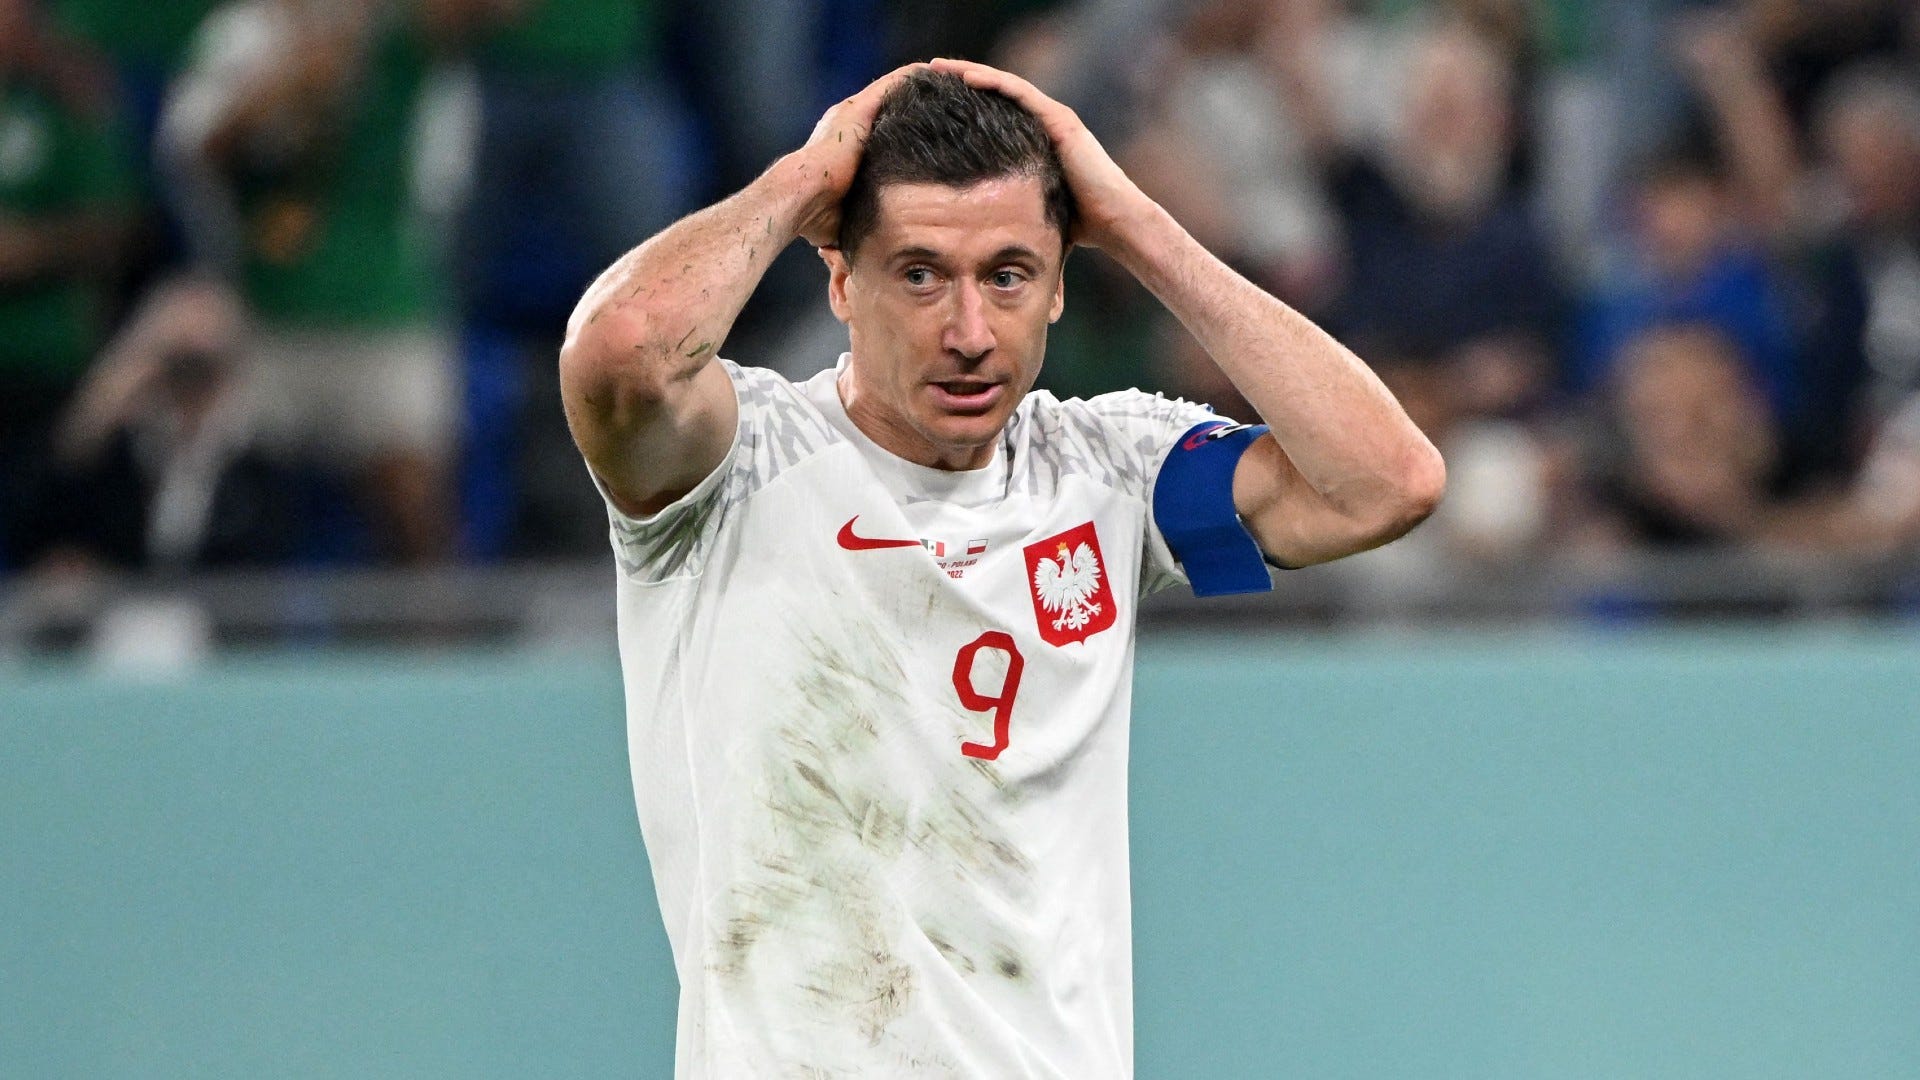 WATCH: The curse continues! Robert Lewandowski denied by Mexico legend  Ochoa from penalty spot as wait for World Cup goal goes on | Goal.com